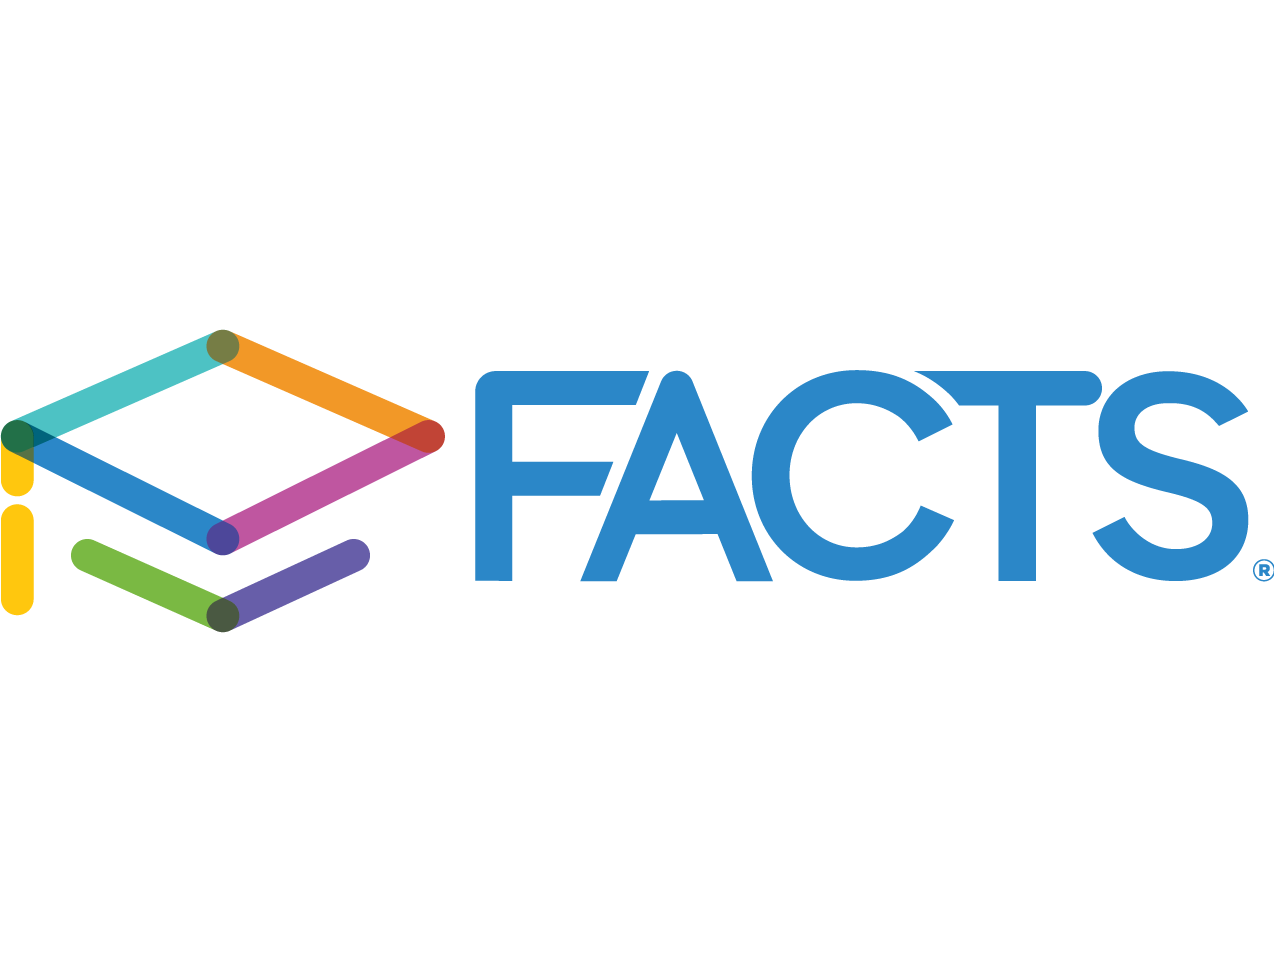 Facts And Renweb Announce Rebrand The Companies Will Serve The Private K 12 Education Market As The Unified Facts Brand